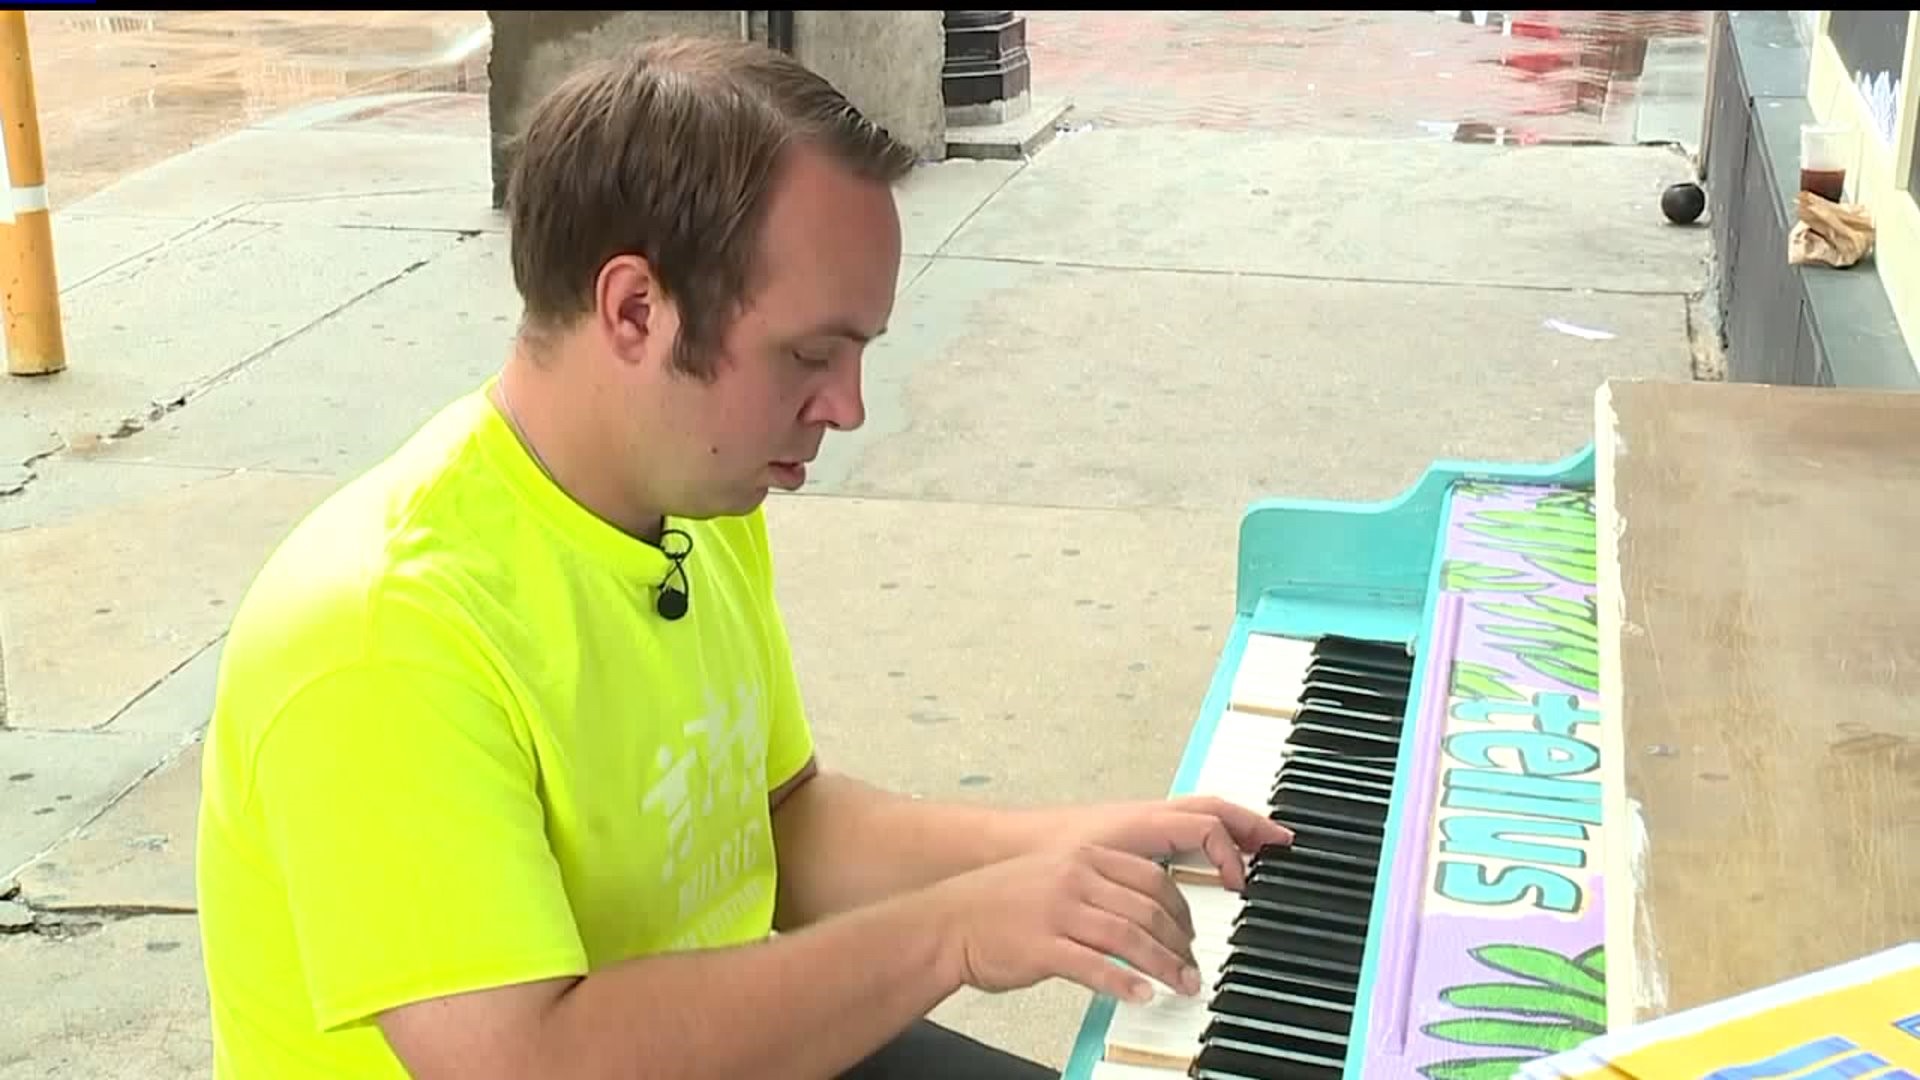 Man with autism composing music